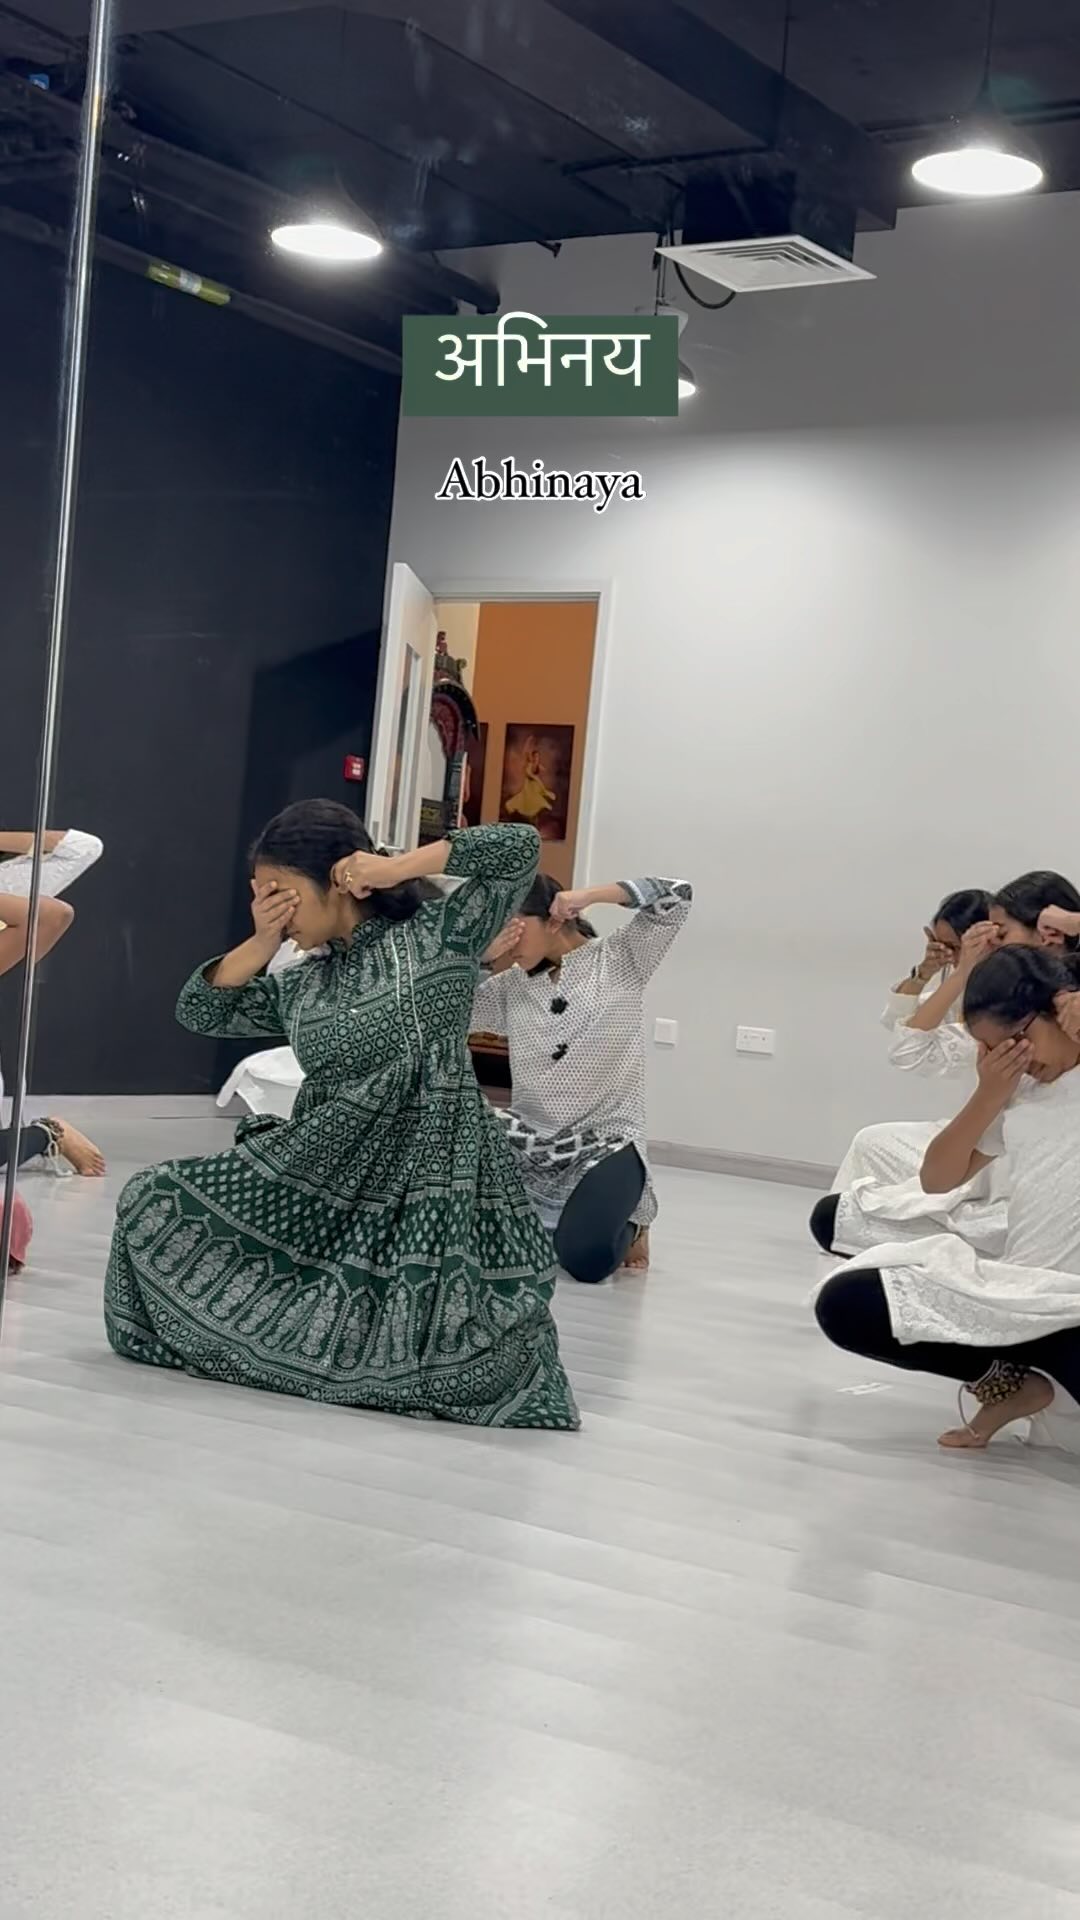 Grade 3 exploring storytelling through ‘Maiyya Mori’. 🦚🍯🪈✨
Expressions of mischief, hunger and surrendering to the divine 🙏🏽✨

Kathak dance class kids batch krishna poem story